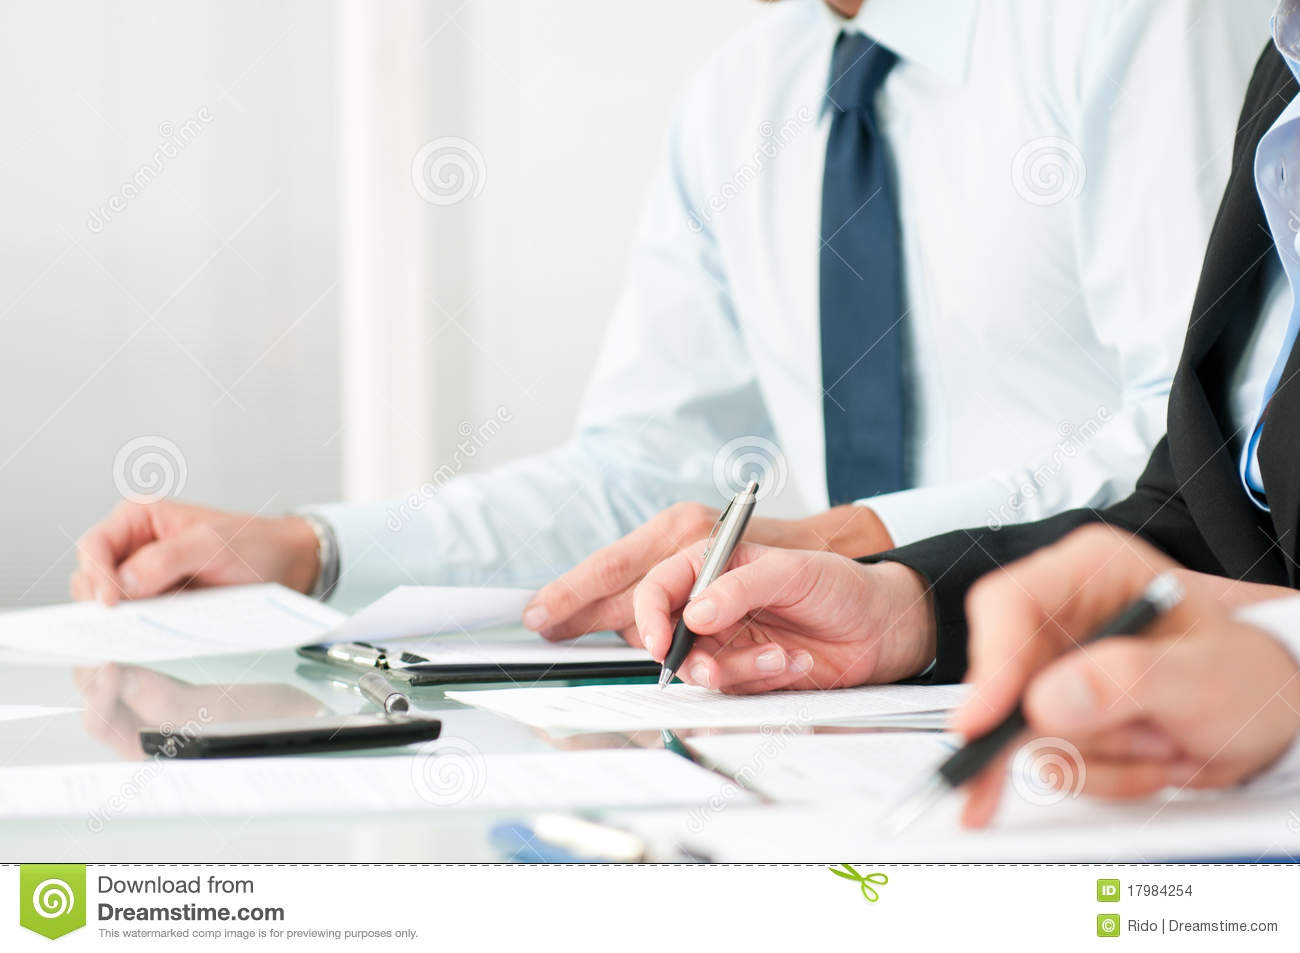 Close Up Shot Of People Compiling Forms During A Business Conference